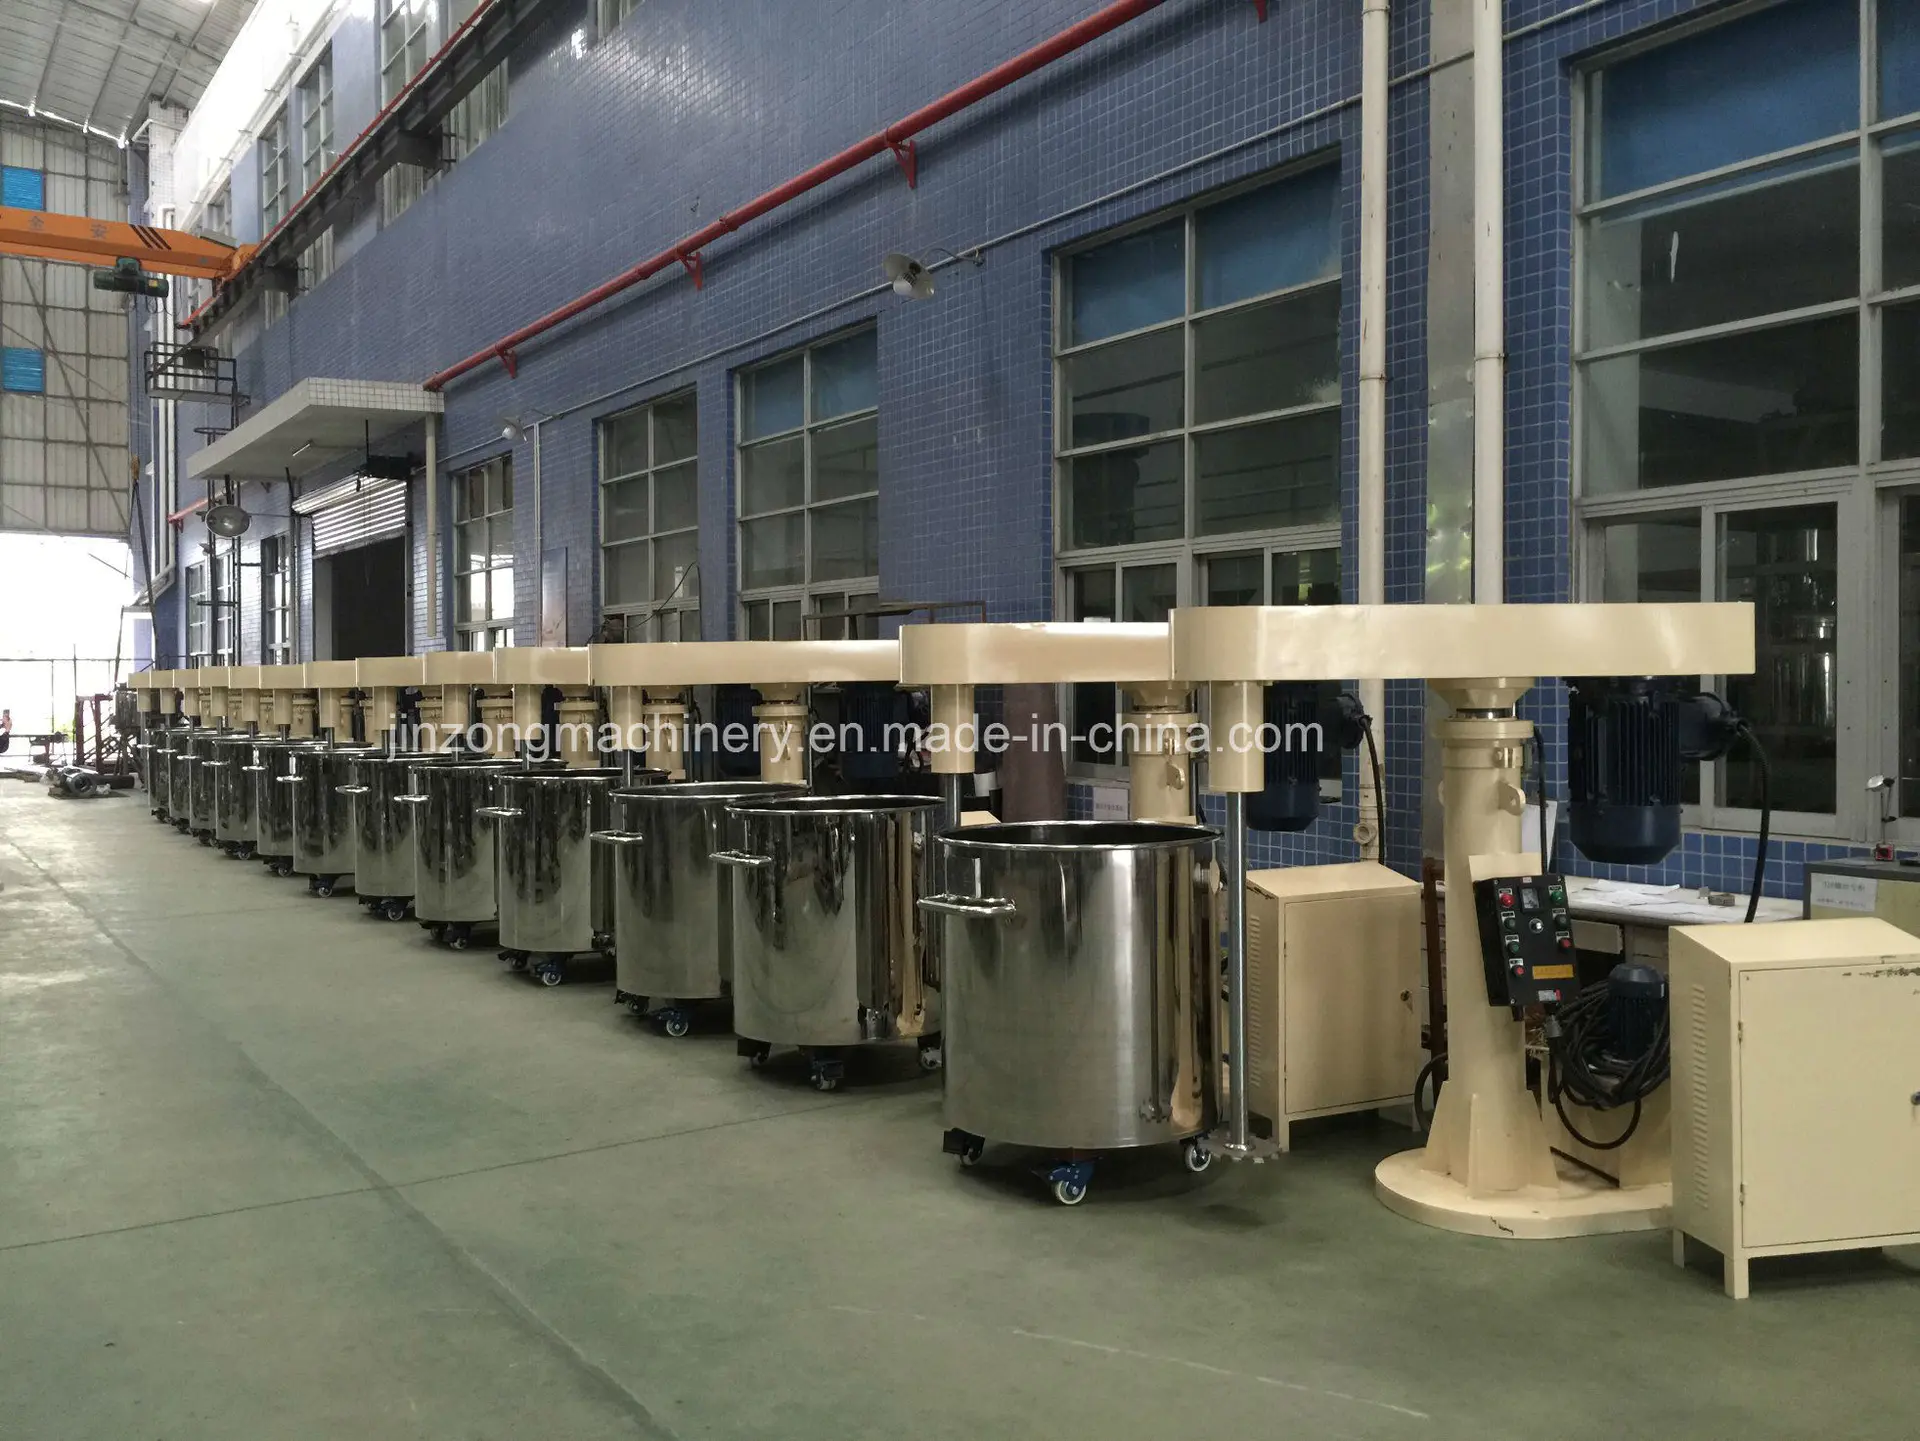 2.2kw~45kw Hydraulic Lifting High Speed Disperser for Paint Coating Inks